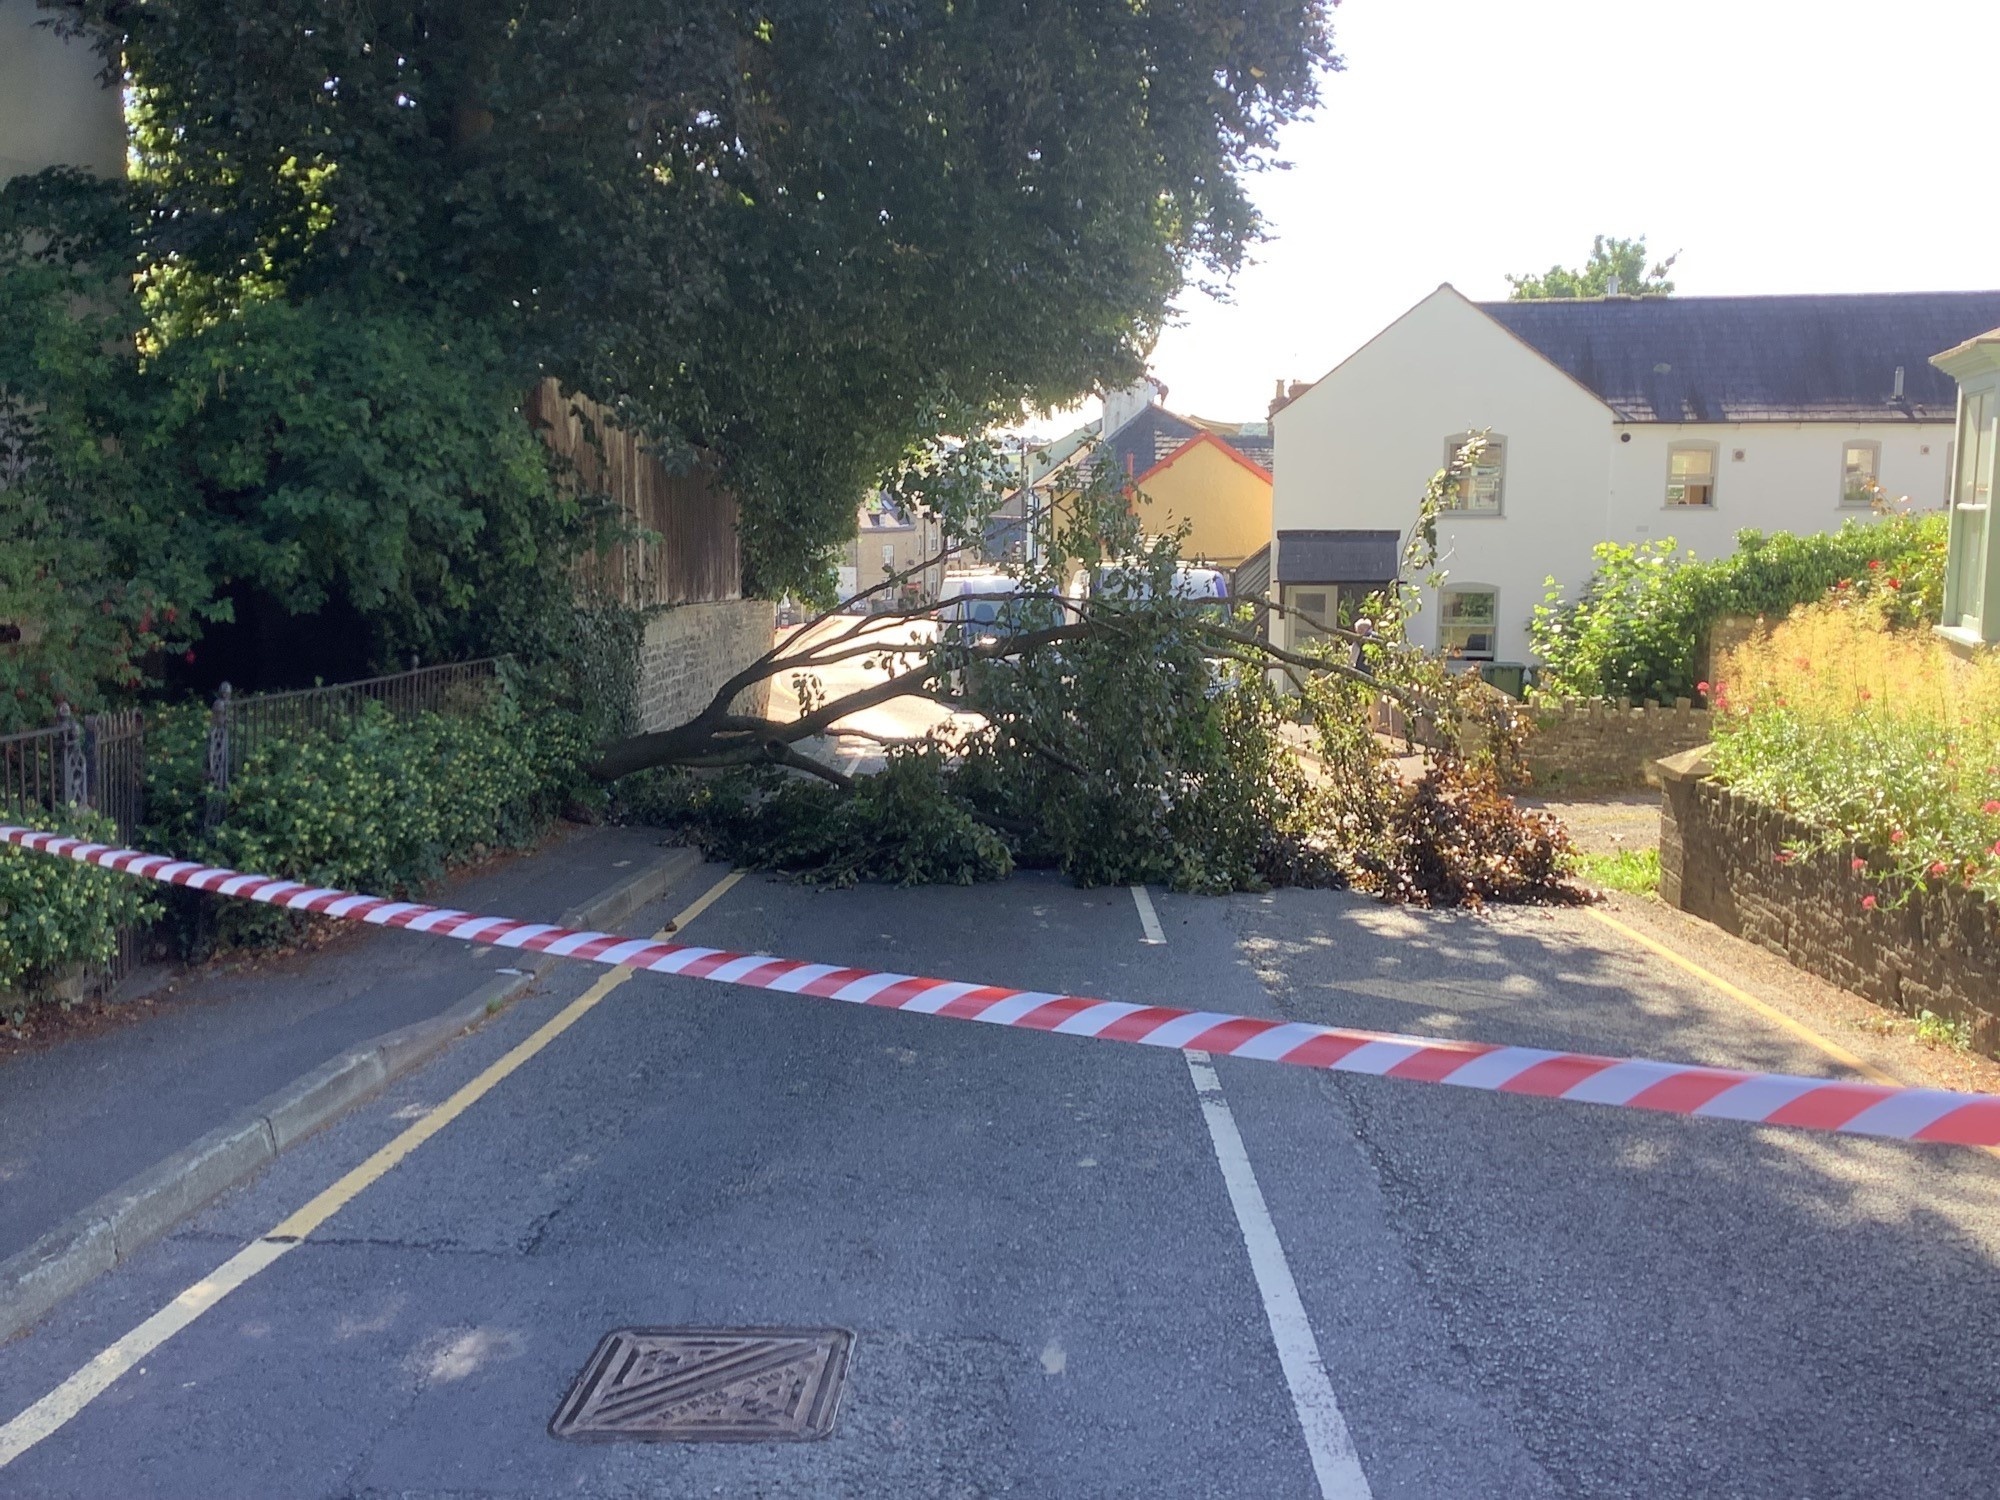 NEWS | A busy route in a Herefordshire market town is blocked by a fallen tree this morning